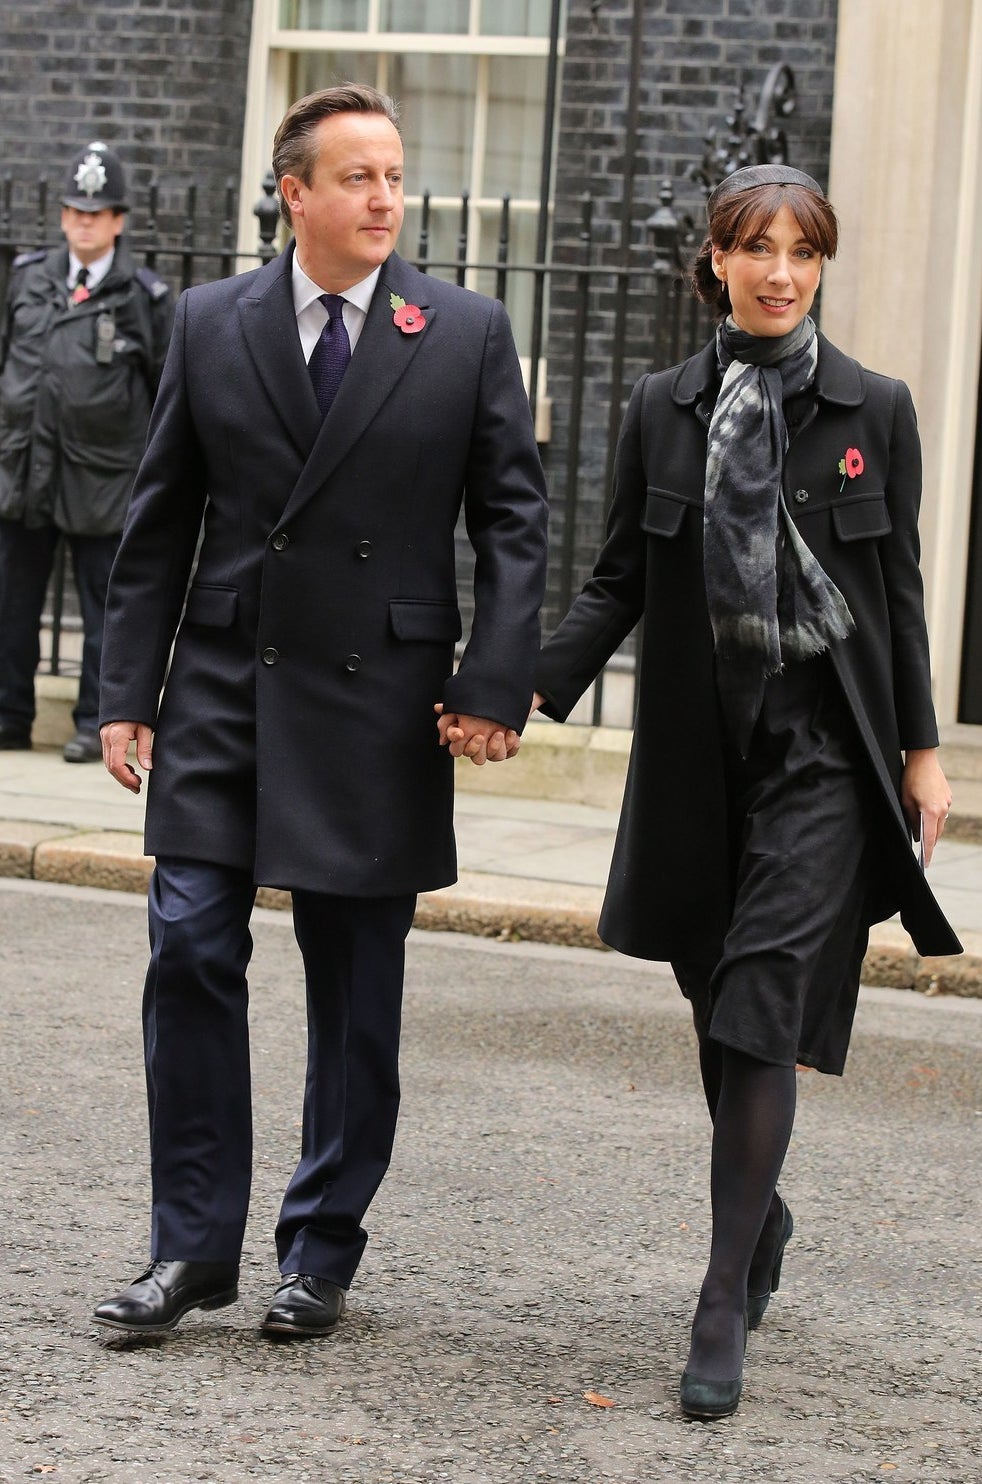 Prime Minister David Cameron and his wife Samantha.